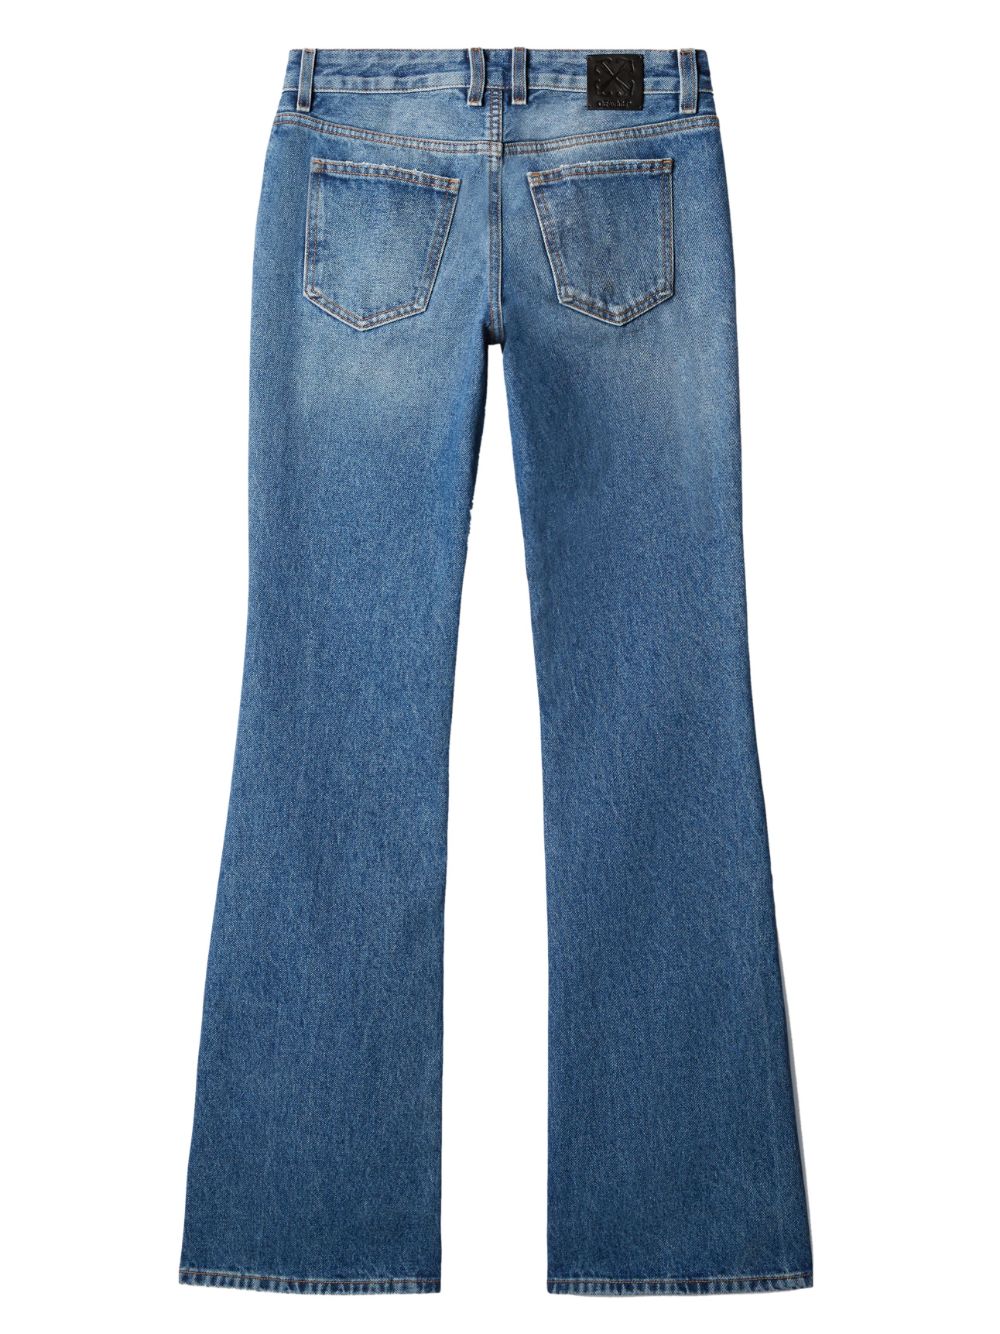 Flared cotton jeans with mid-rise waist